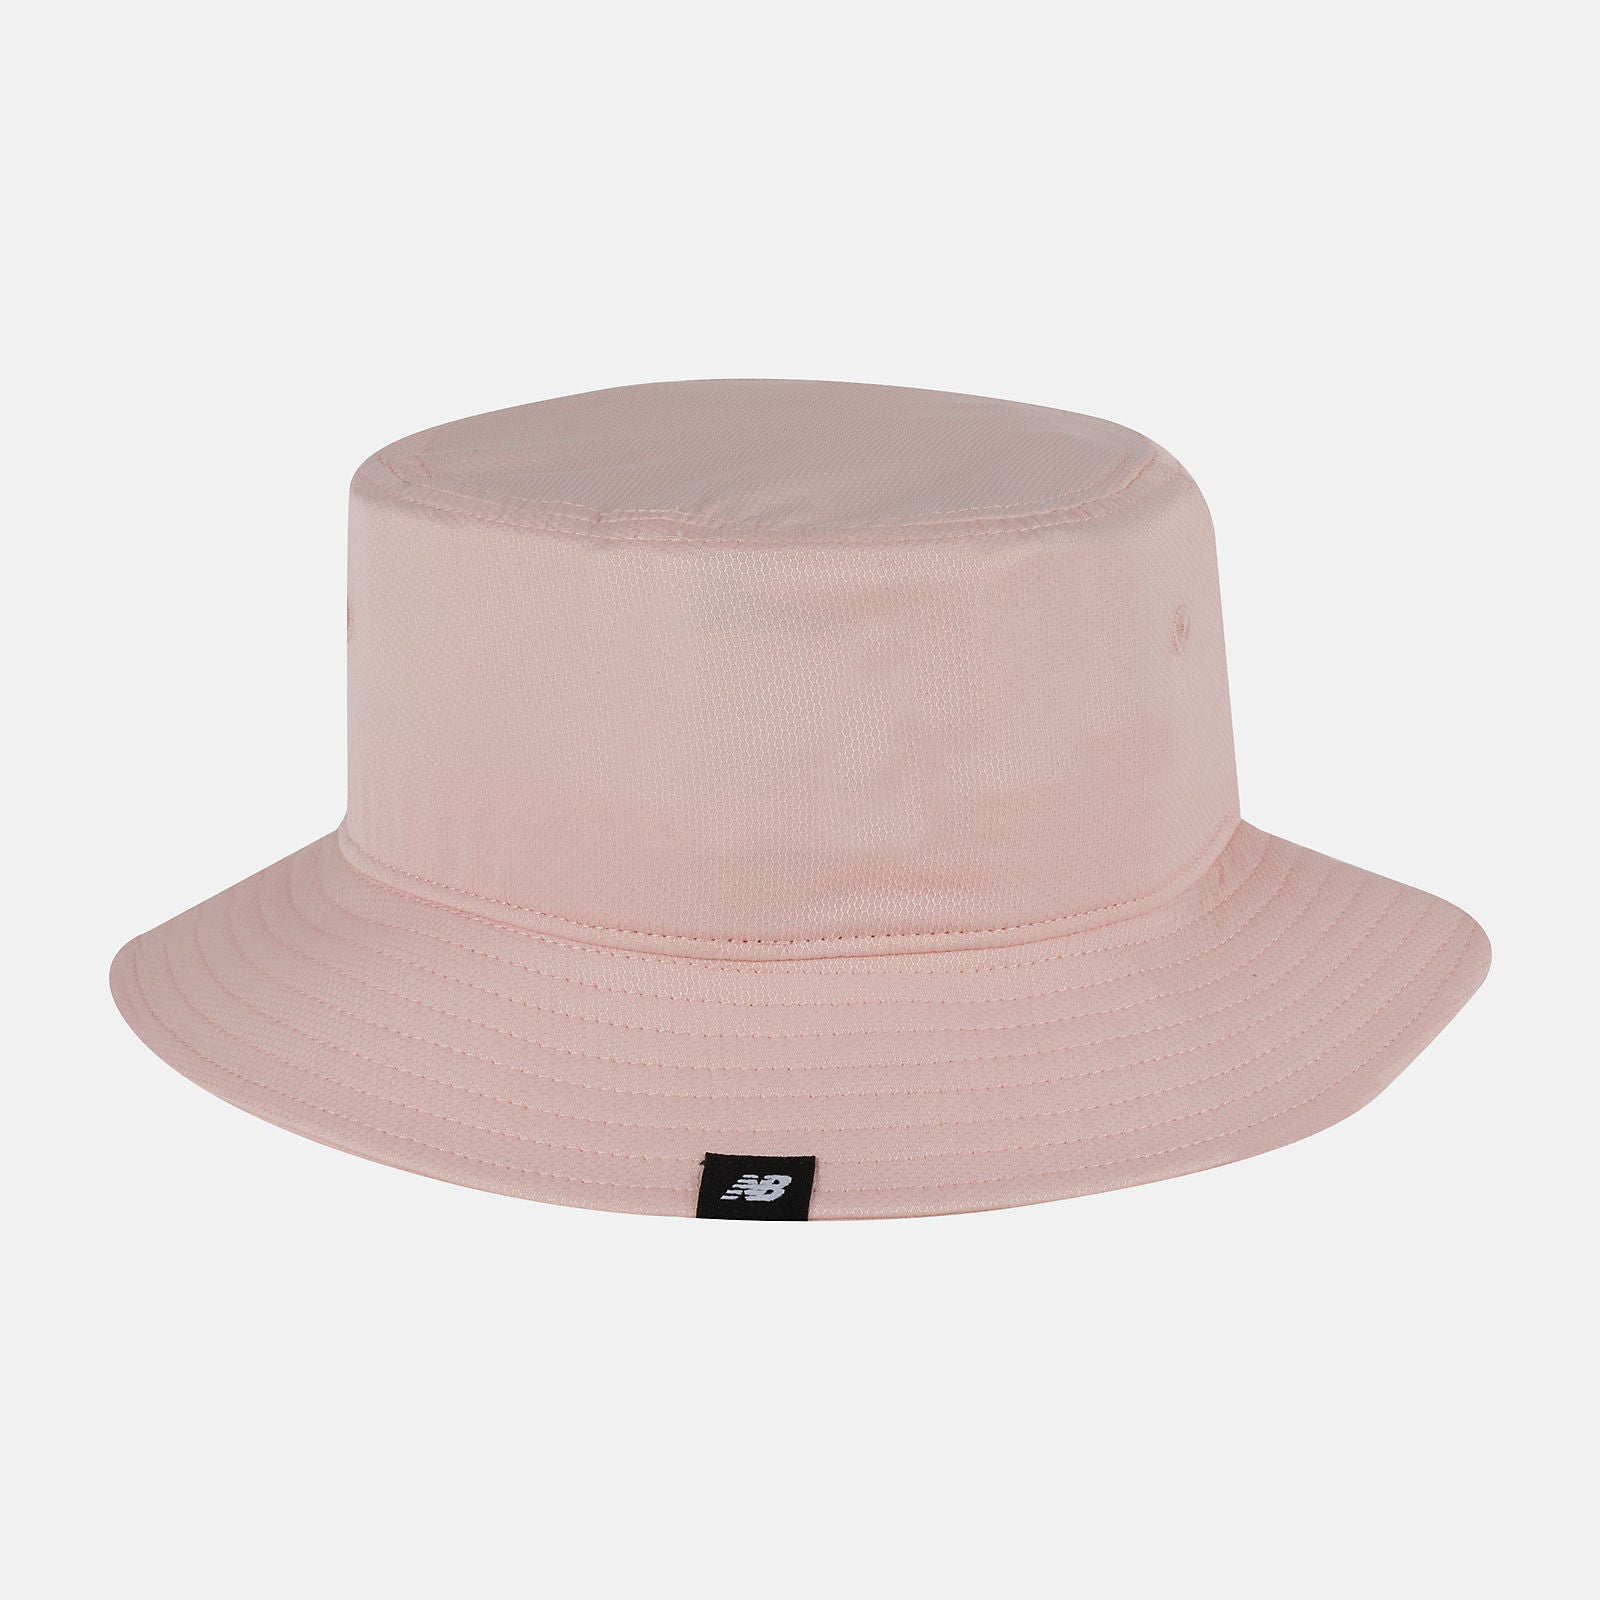 NEW BALANCE Kid's Bucket Hat in Light Pink LAH31007 O/S PINK HAZE FROM EIGHTYWINGOLD - OFFICIAL BRAND PARTNER